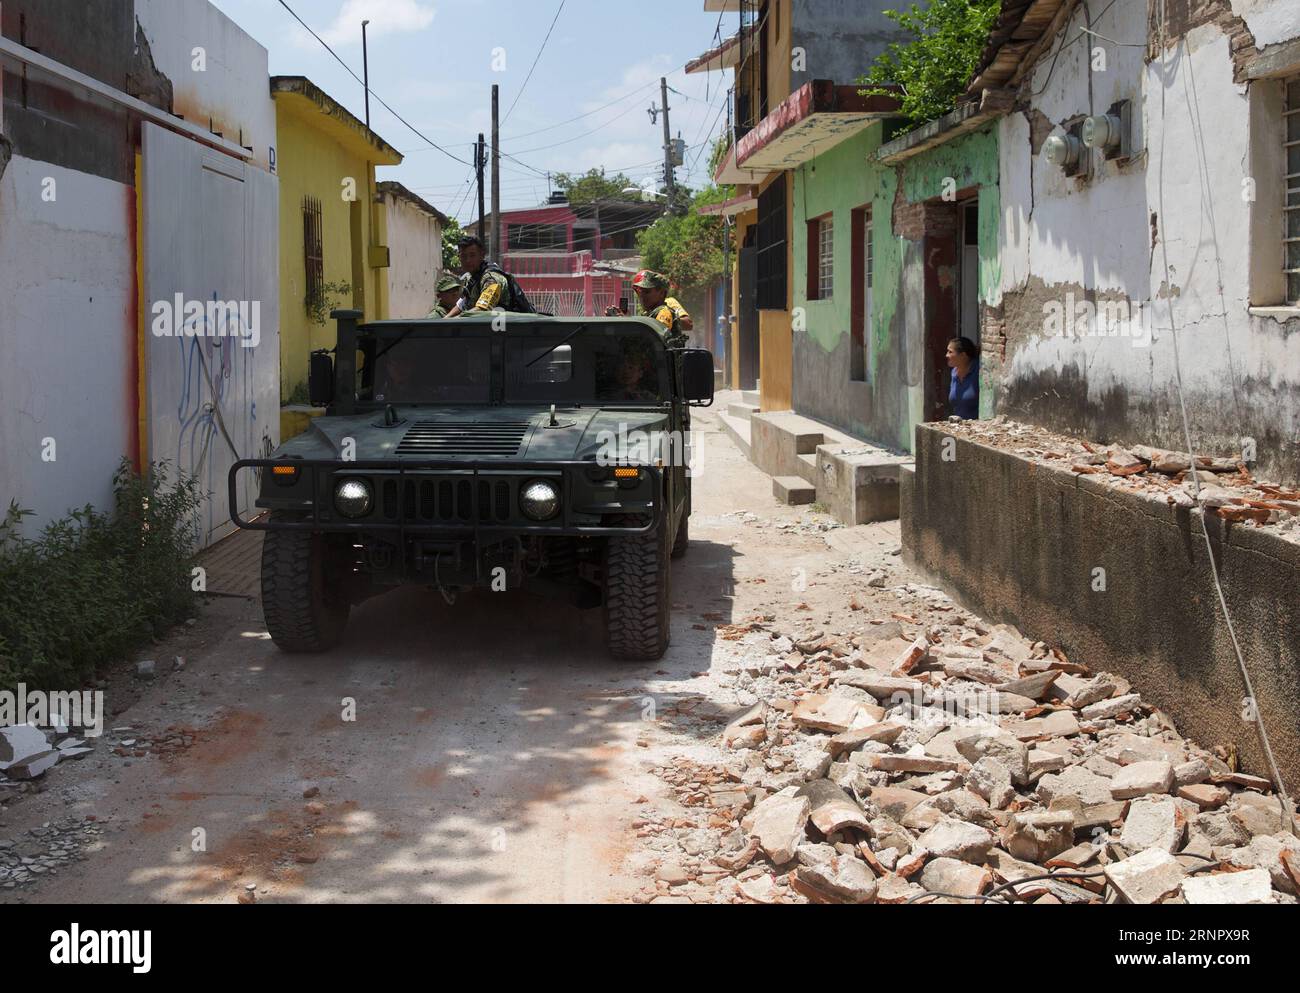 (170910) -- JUCHITAN (MEXICO), Sept. 10, 2017 -- A military vehicle inspects a street after an earthquake hit in Juchitan, Oaxaca state, Mexico, Sept. 9, 2017. A powerful earthquake measuring 8.2 on the Richter scale struck off Mexico s southern coast late Thursday night, killing 90 people. ) MEXICO-OAXACA-JUCHITAN-EARTHQUAKE DanxHang PUBLICATIONxNOTxINxCHN Stock Photo